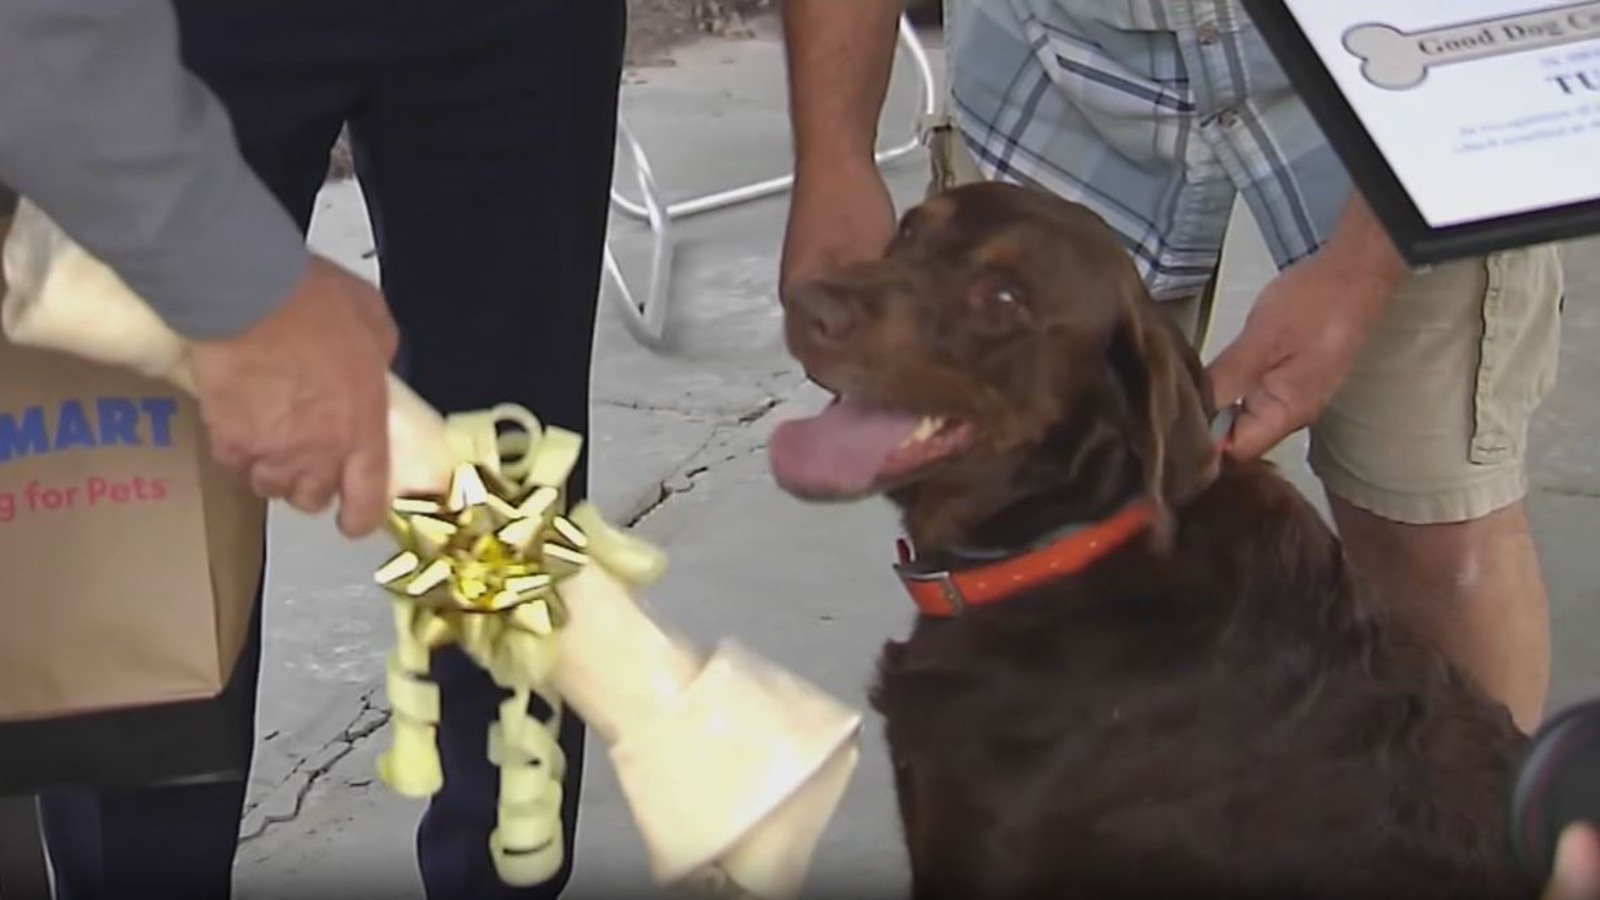 Dog who alerted owners to escaped inmate in backyard leading to his capture rewarded in toys